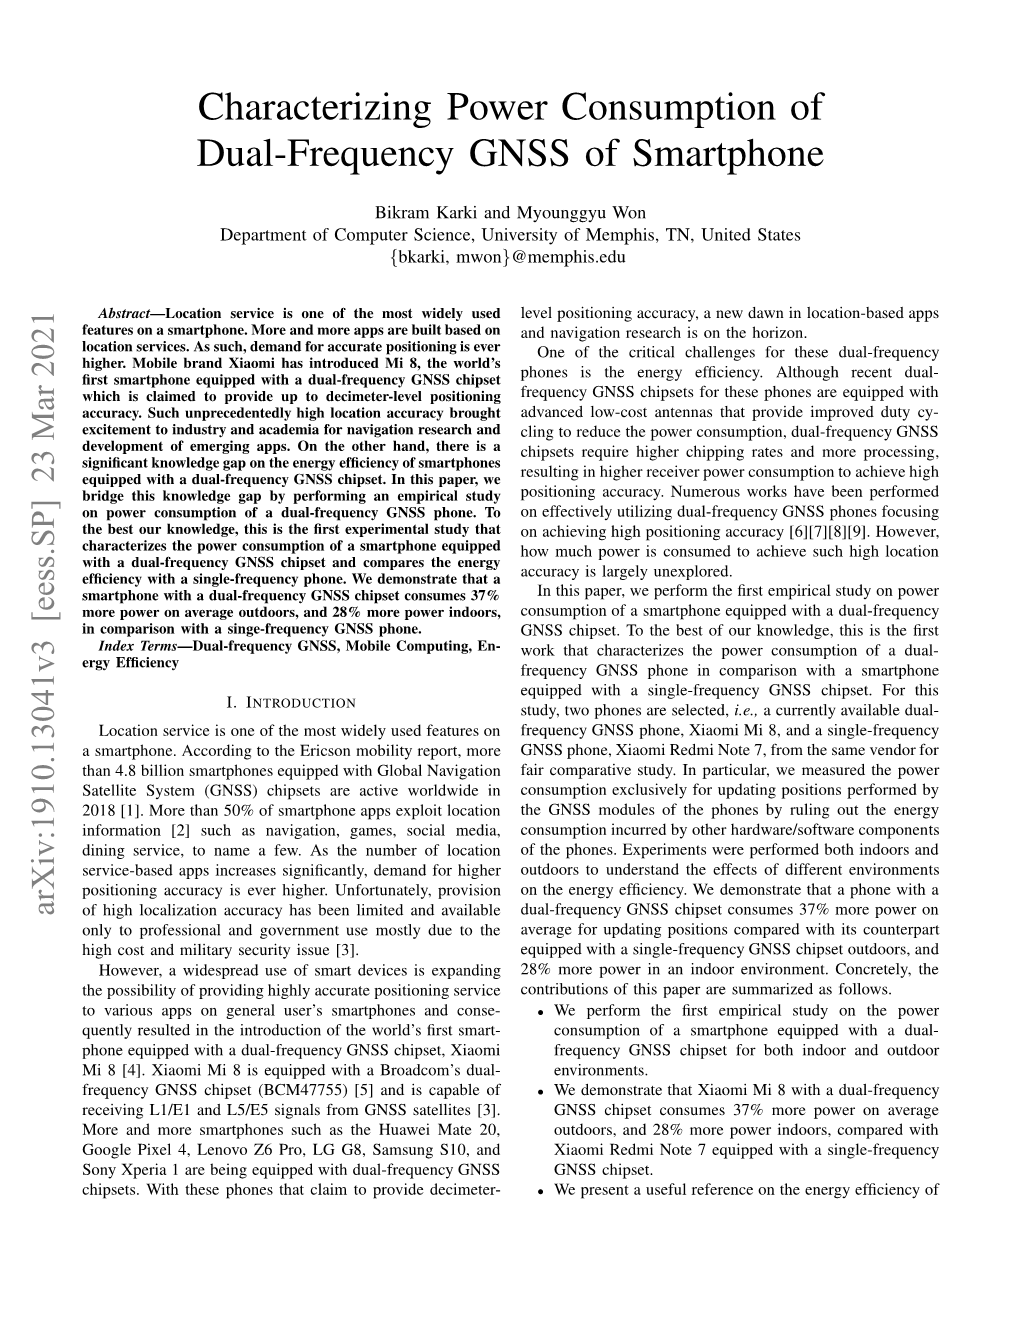 Characterizing Power Consumption of Dual-Frequency GNSS Of